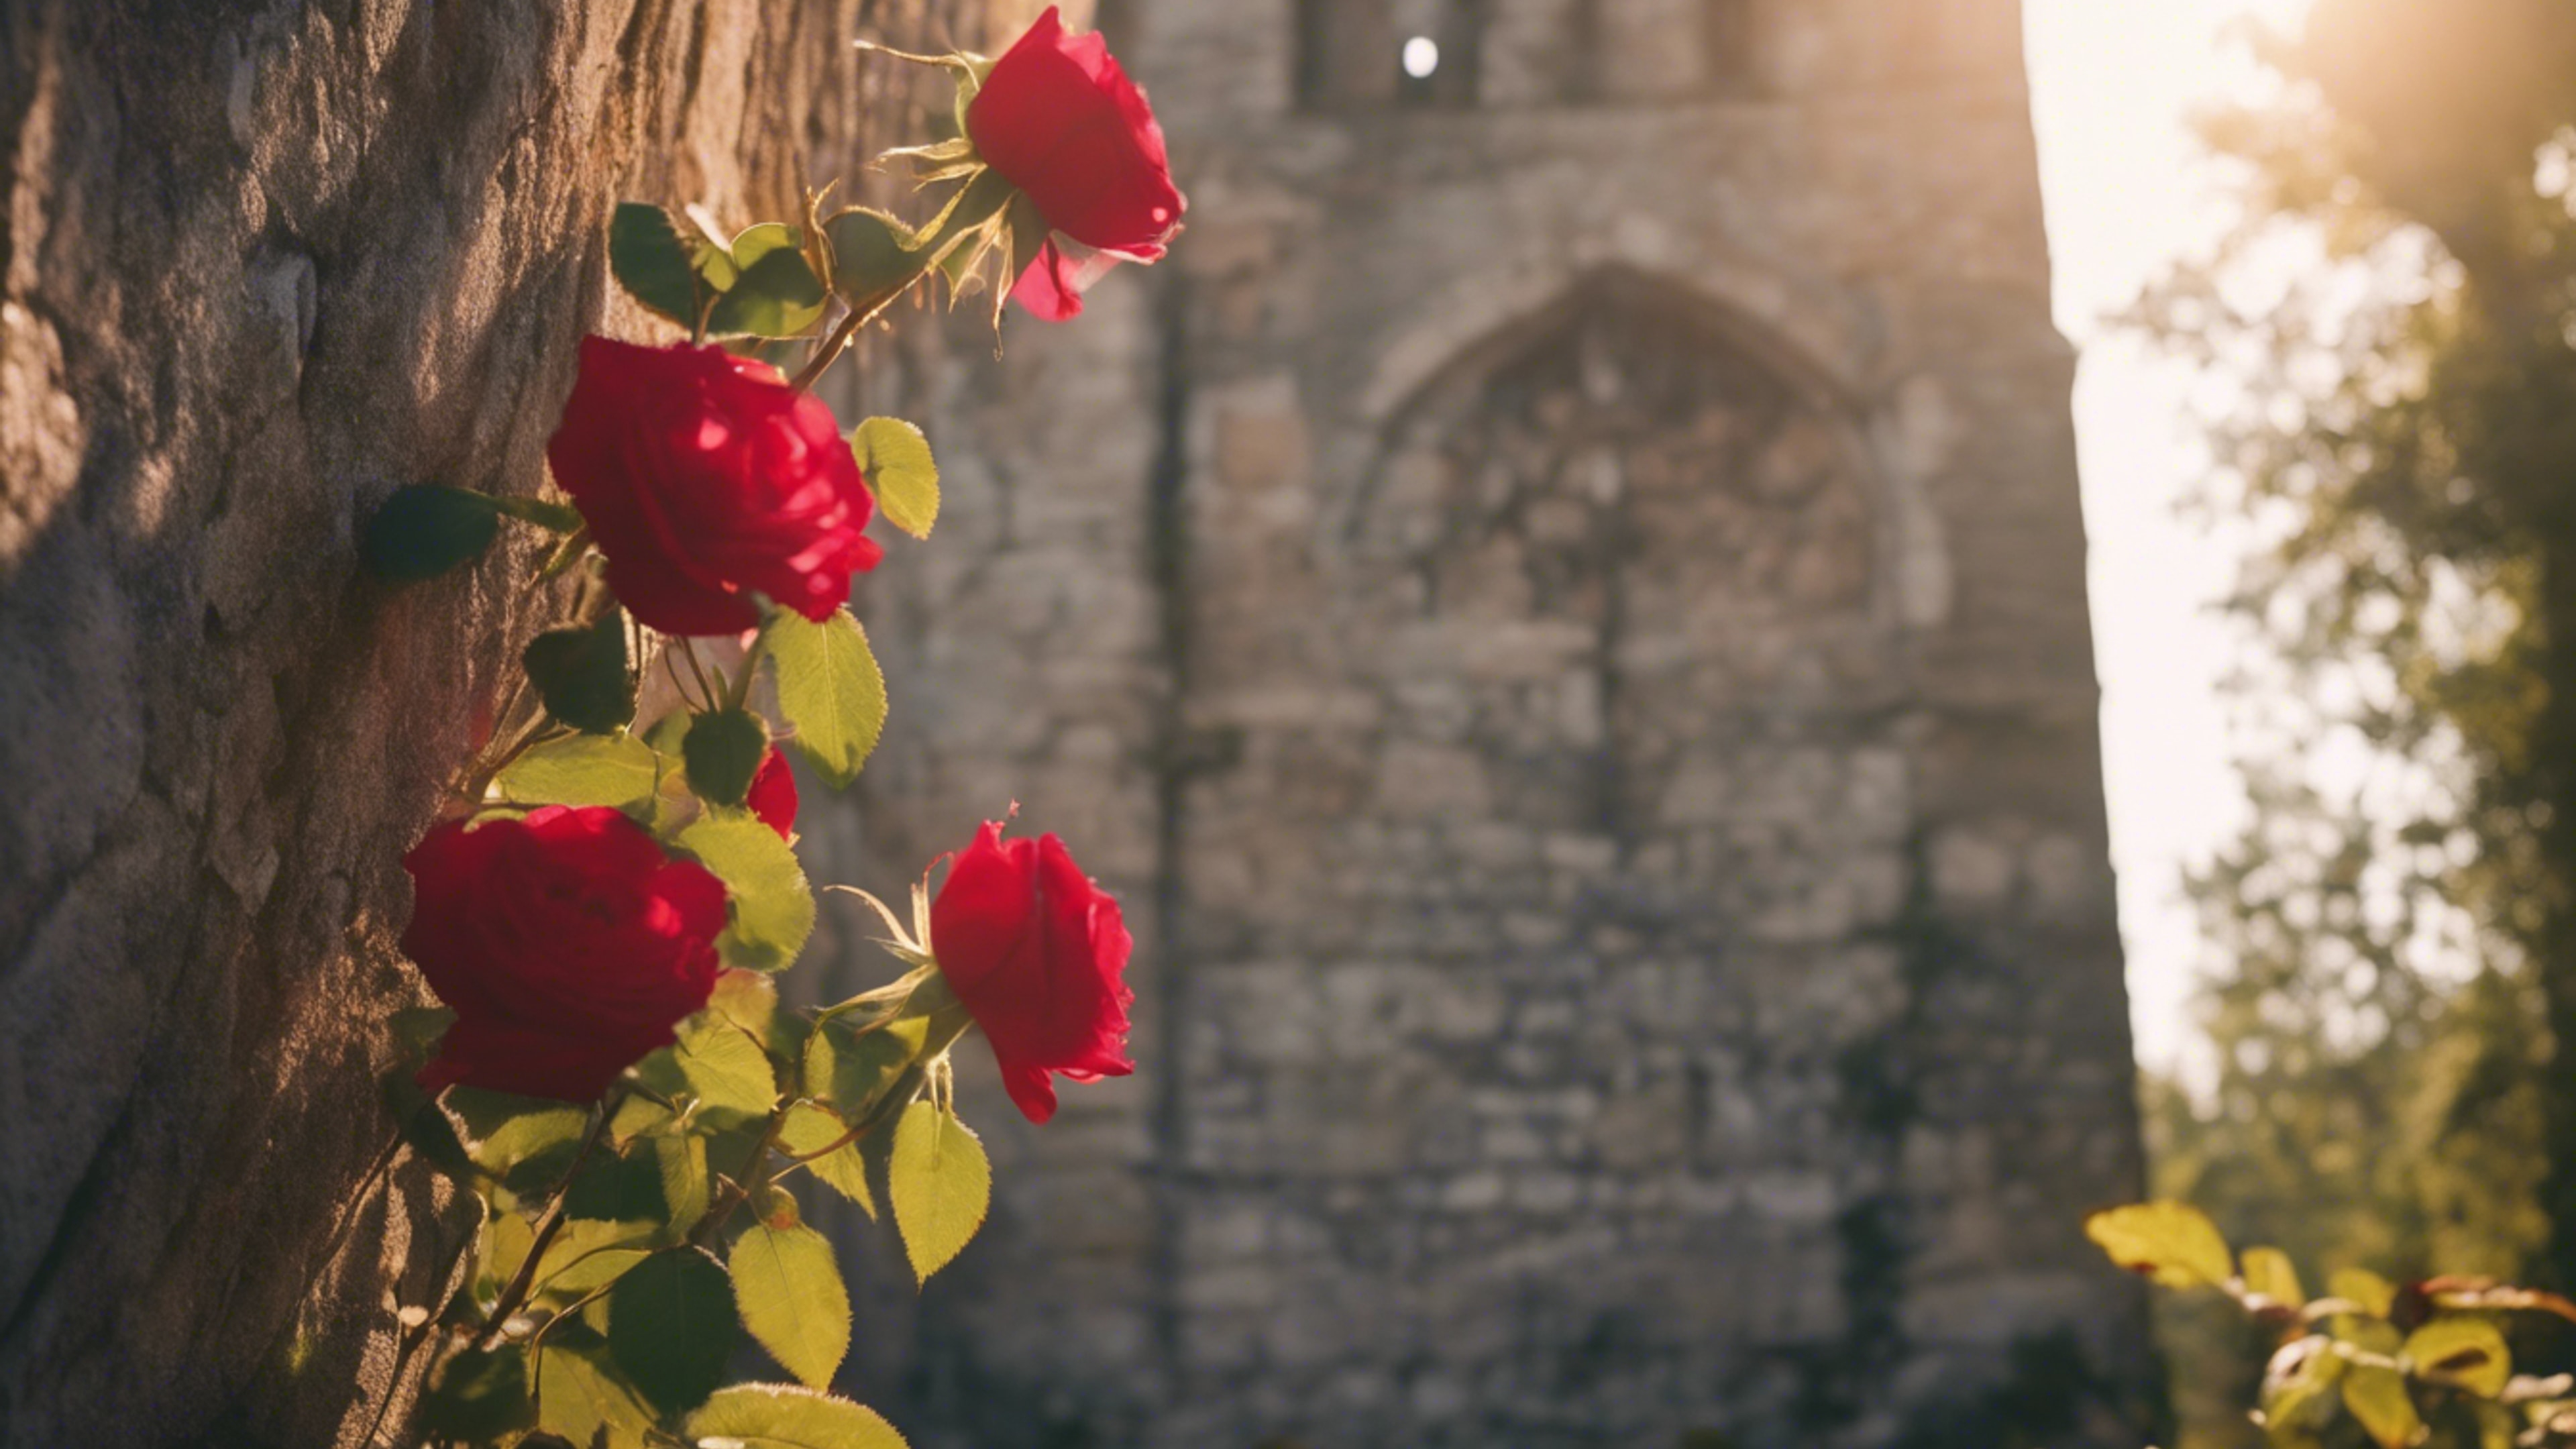 Wild red roses climbing the worn stone wall of an abandoned Gothic tower, the scenery bathed in soft, golden sunlight. Wallpaper[e7fe6c543bfa4d12bc39]